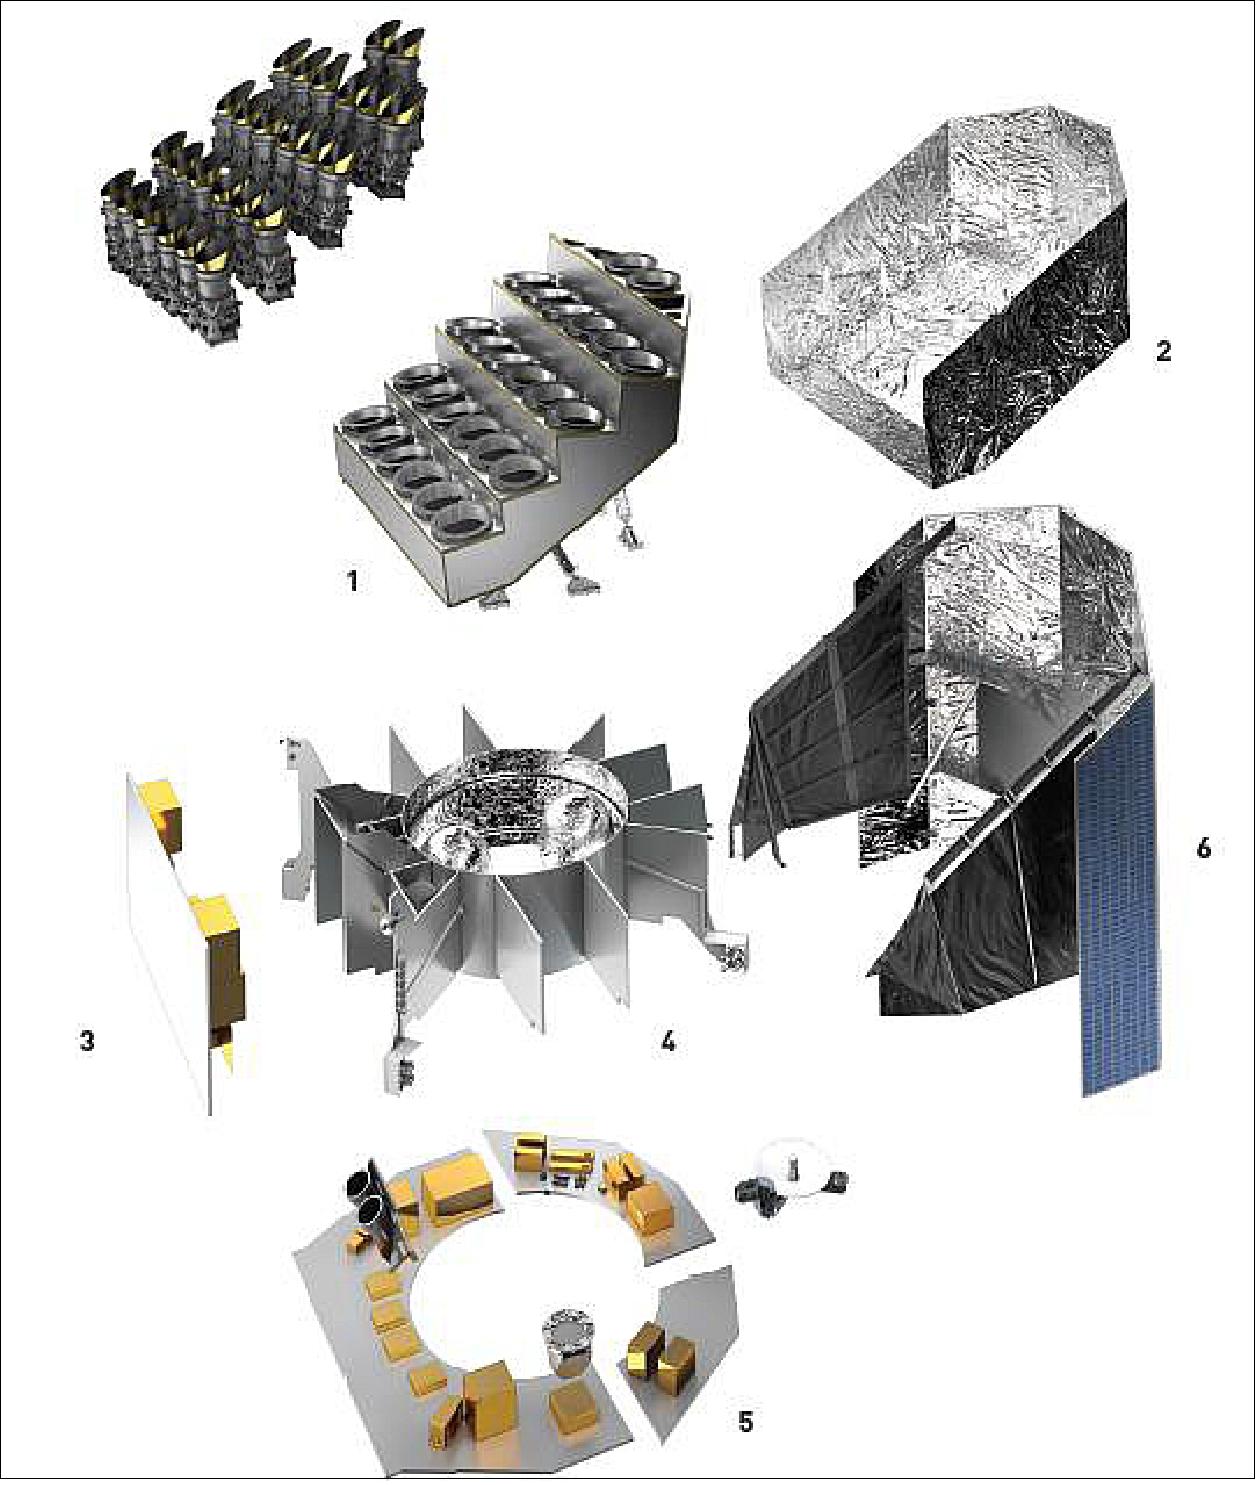 Figure 7: Exploded view of the PLATO Spacecraft. 1: Optical Bench Assembly (OBA). 2: Payload Thermal shield. 3: Payload Electronics panel. 4: Central Module - Structure and Propulsion. 5: Avionics and Electronics panels. 6: Sunshield (SS) and Solar Array (image credit: PLATO consortium)